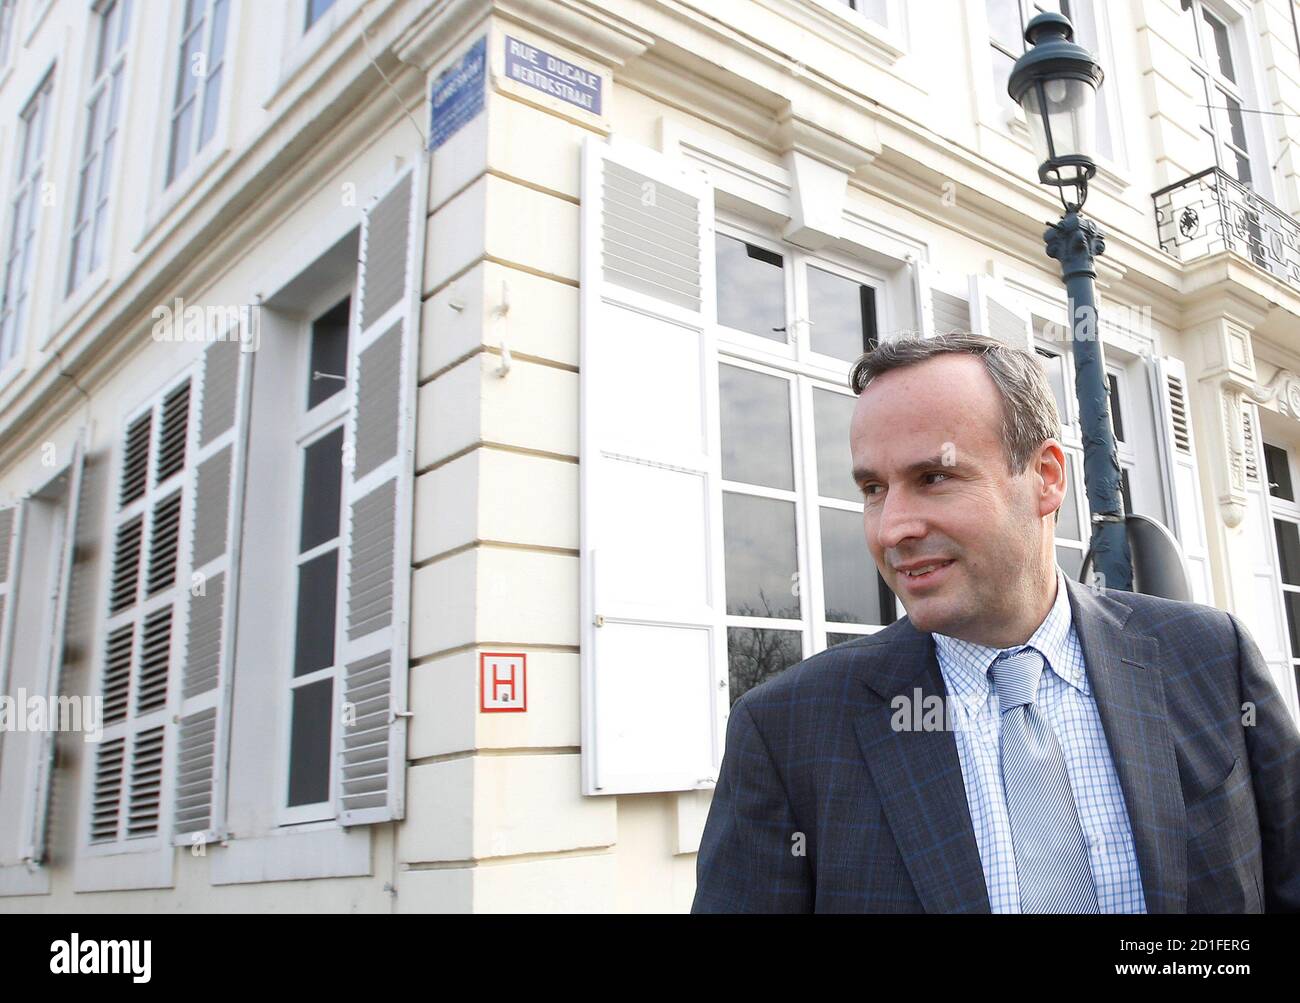 Belgium's Enterprises Federation VBO-FEB Chairman Thomas Leysen leaves Belgium's Prime Minister Yves Leterme's office after a meeting in Brussels February 8, 2010. Belgian government met with unions on employment.    REUTERS/Yves Herman    (BELGIUM - Tags: POLITICS EMPLOYMENT BUSINESS) Stock Photo